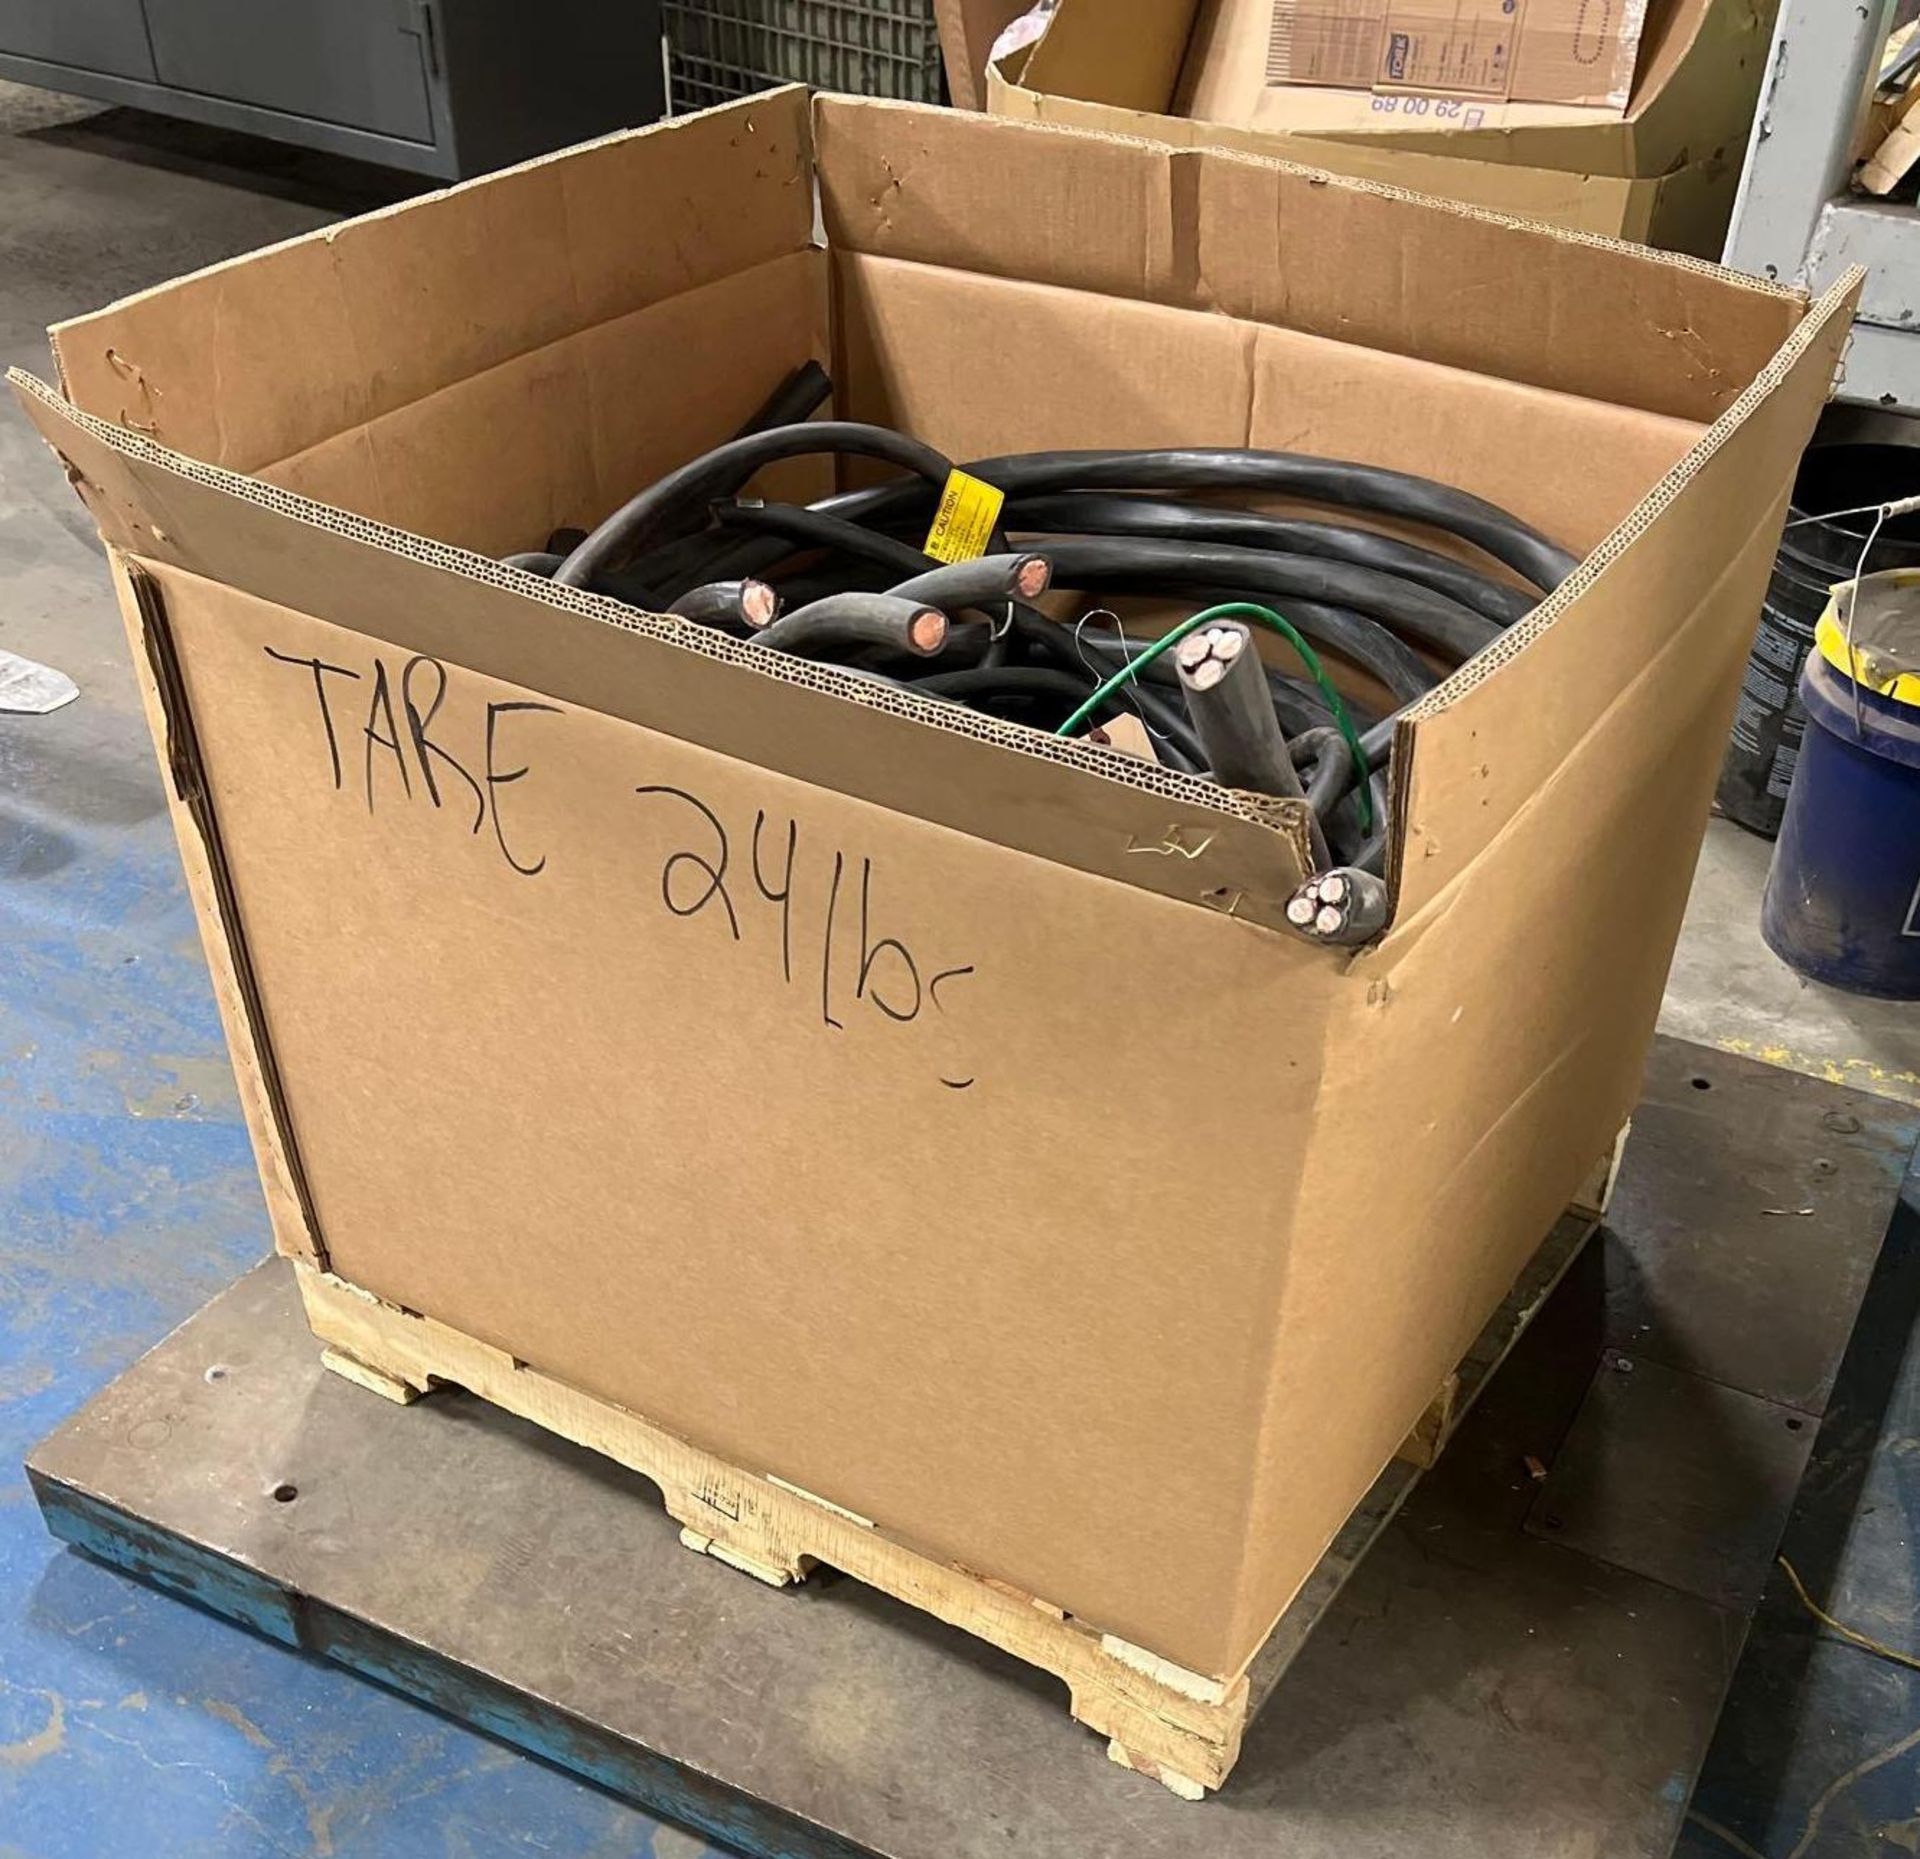 Scrap Wire (Heavy#2) 351 Lbs. (Includes Tare Weight) - Image 12 of 12